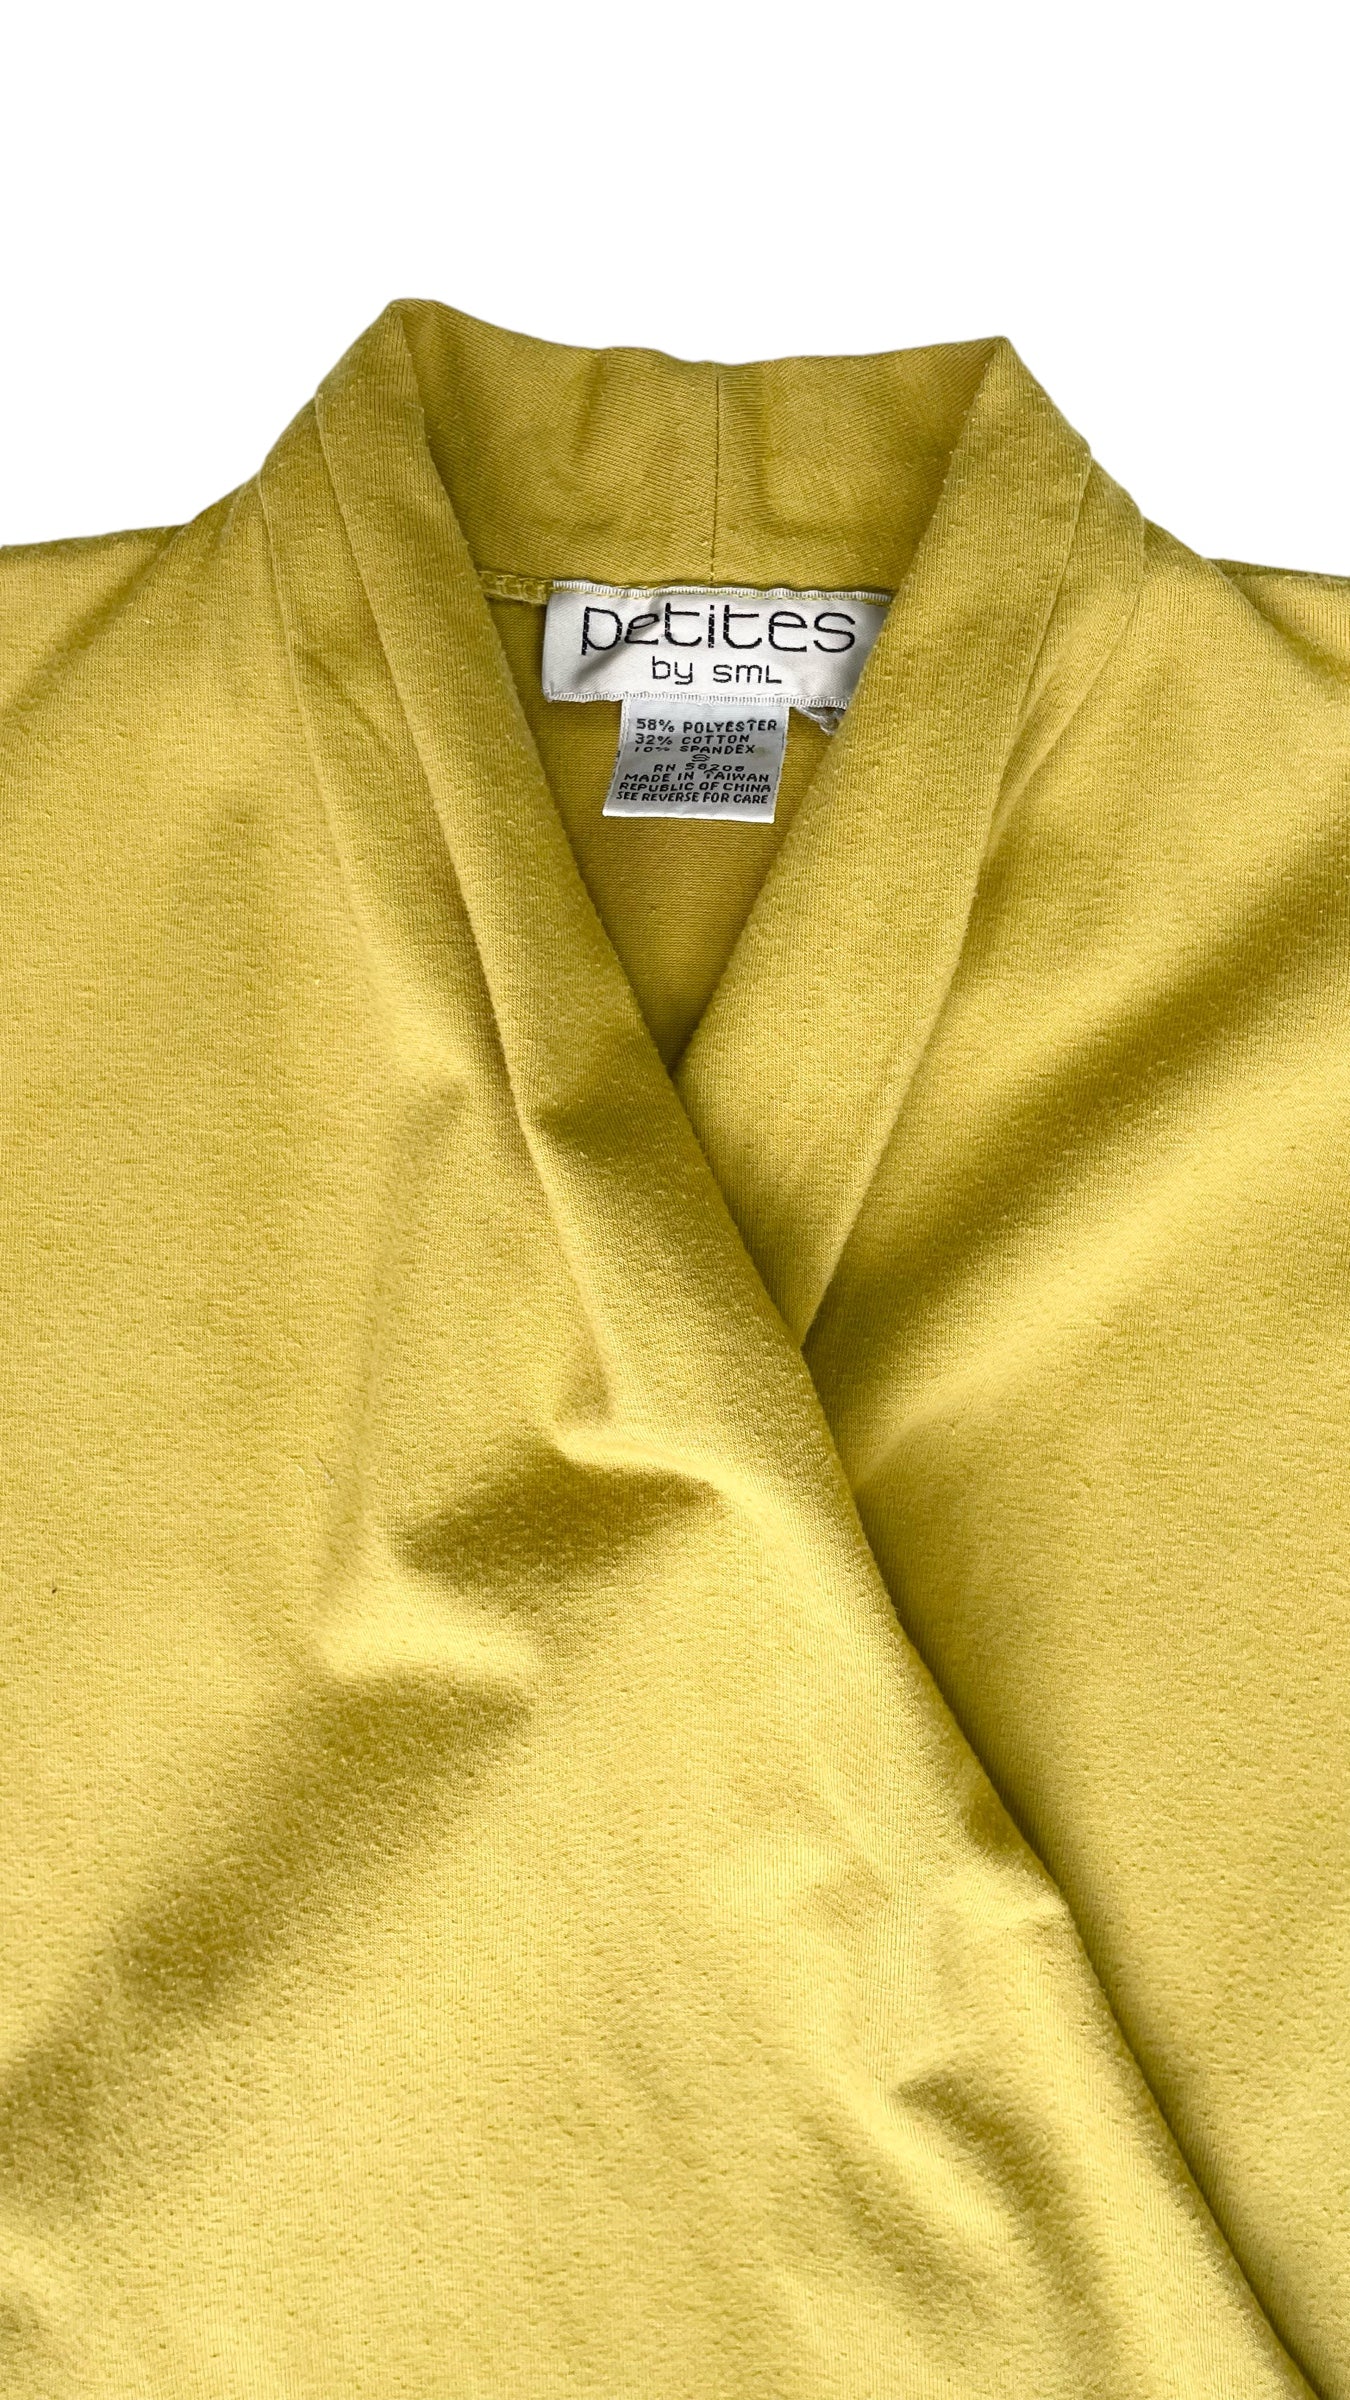 Vintage 90s chartreuse green knit wrap top - Size S